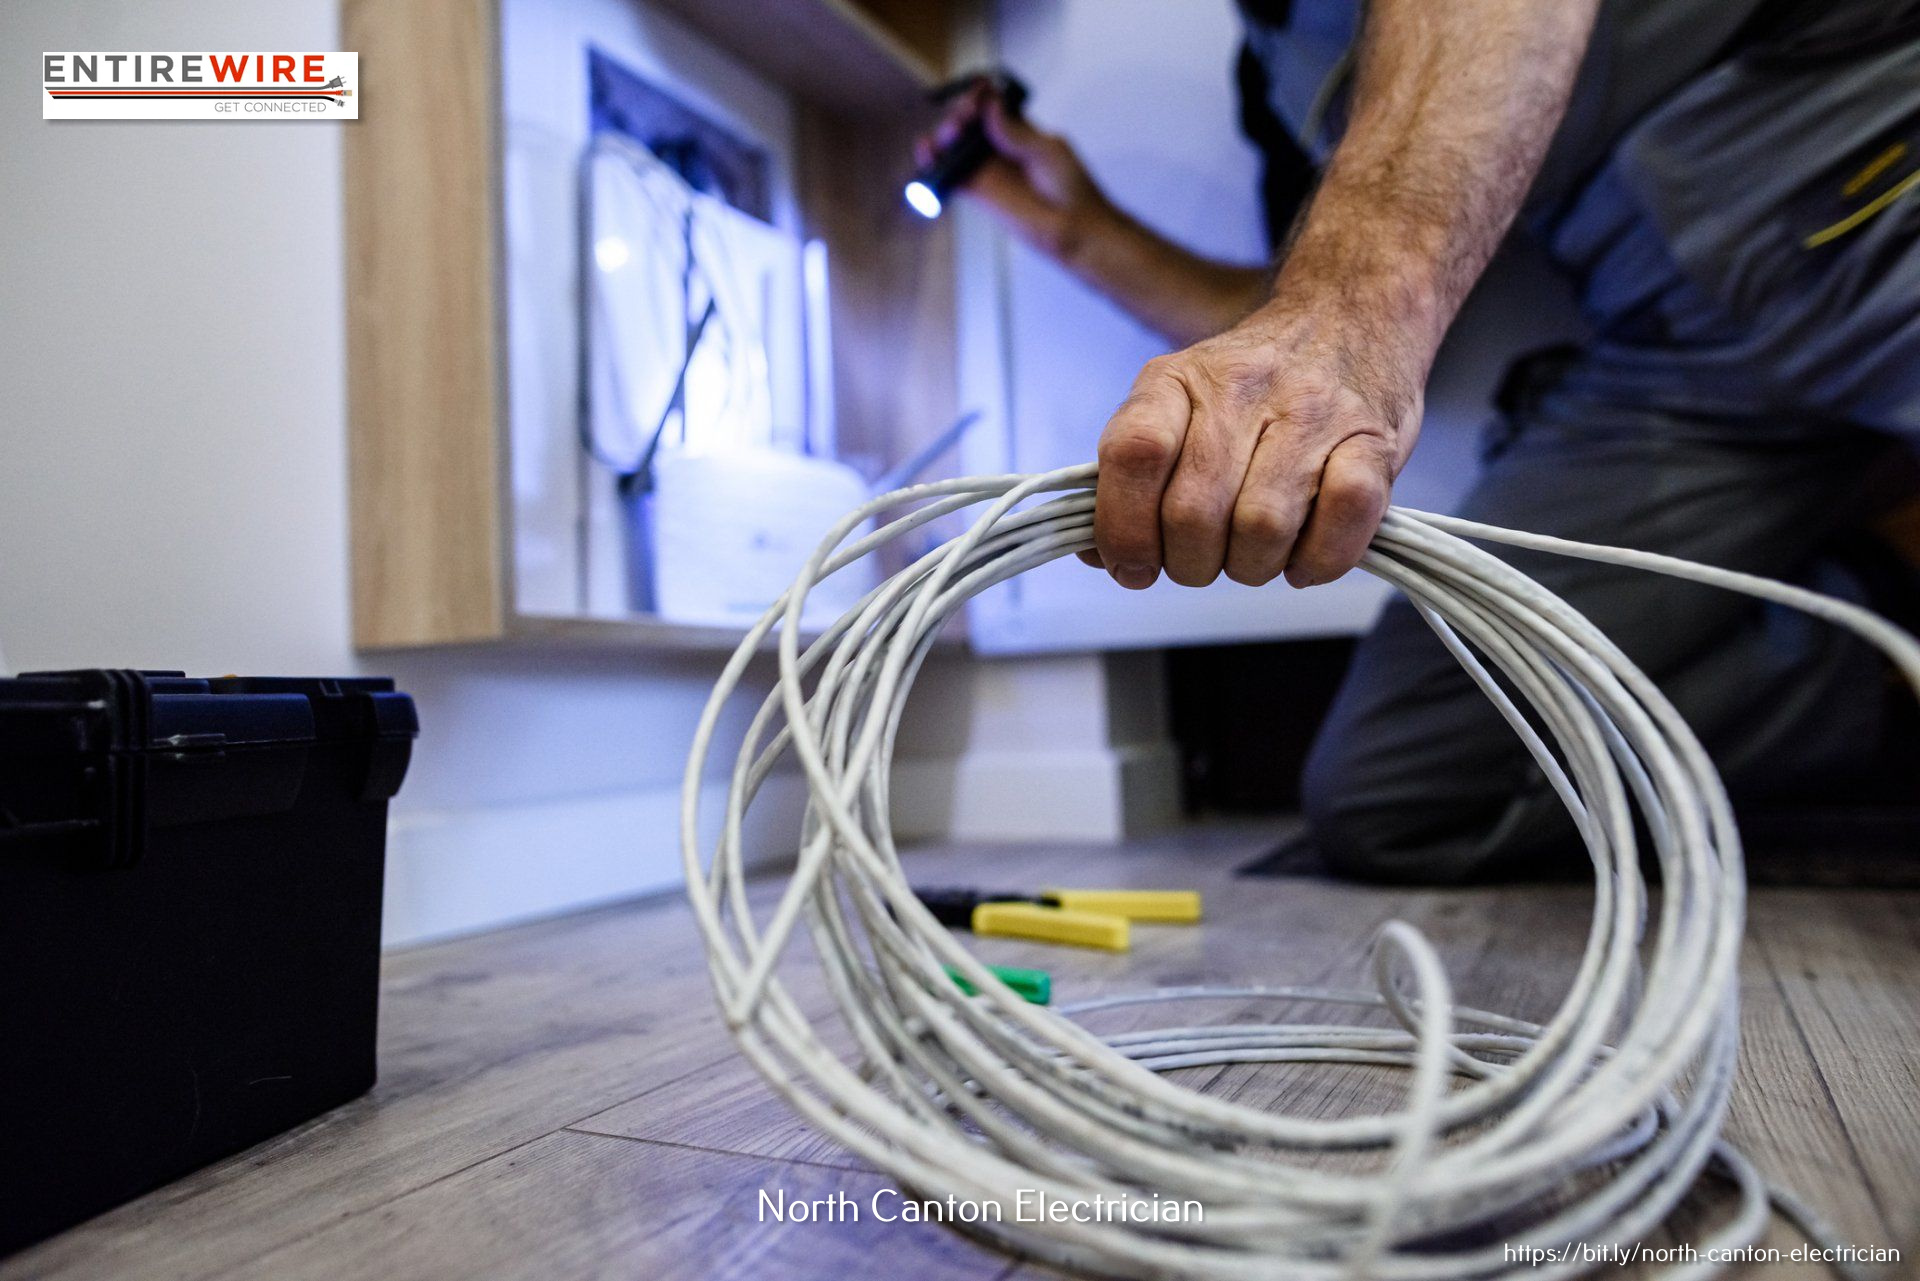 Entirewire Electrician Highlights the Importance of Hiring a Reliable Electrician 13